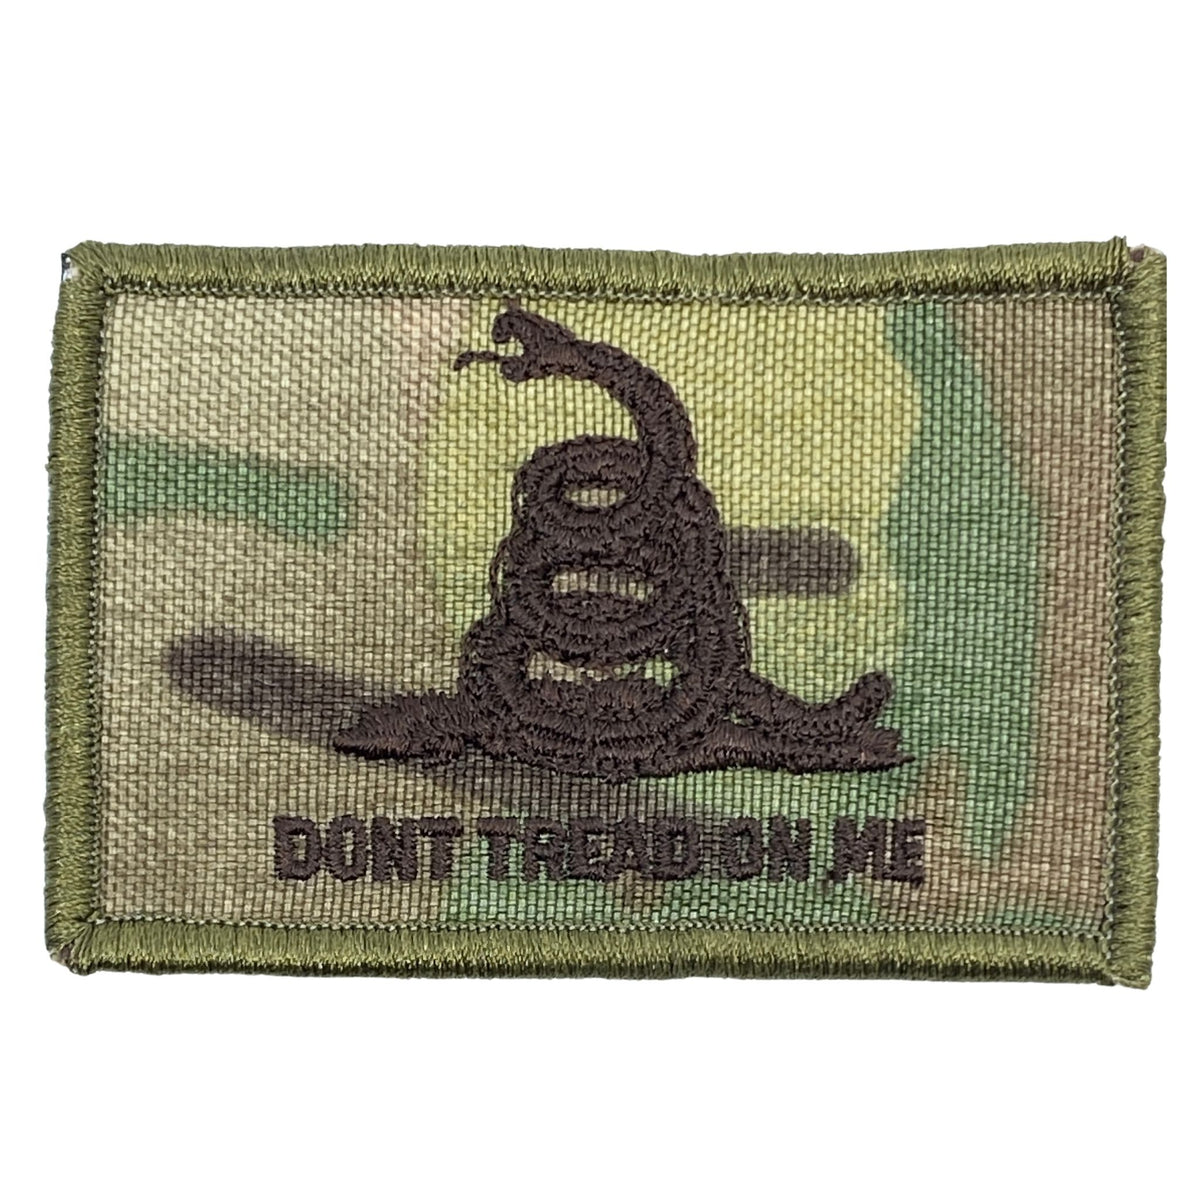 Don't Tread on Me Patch Black